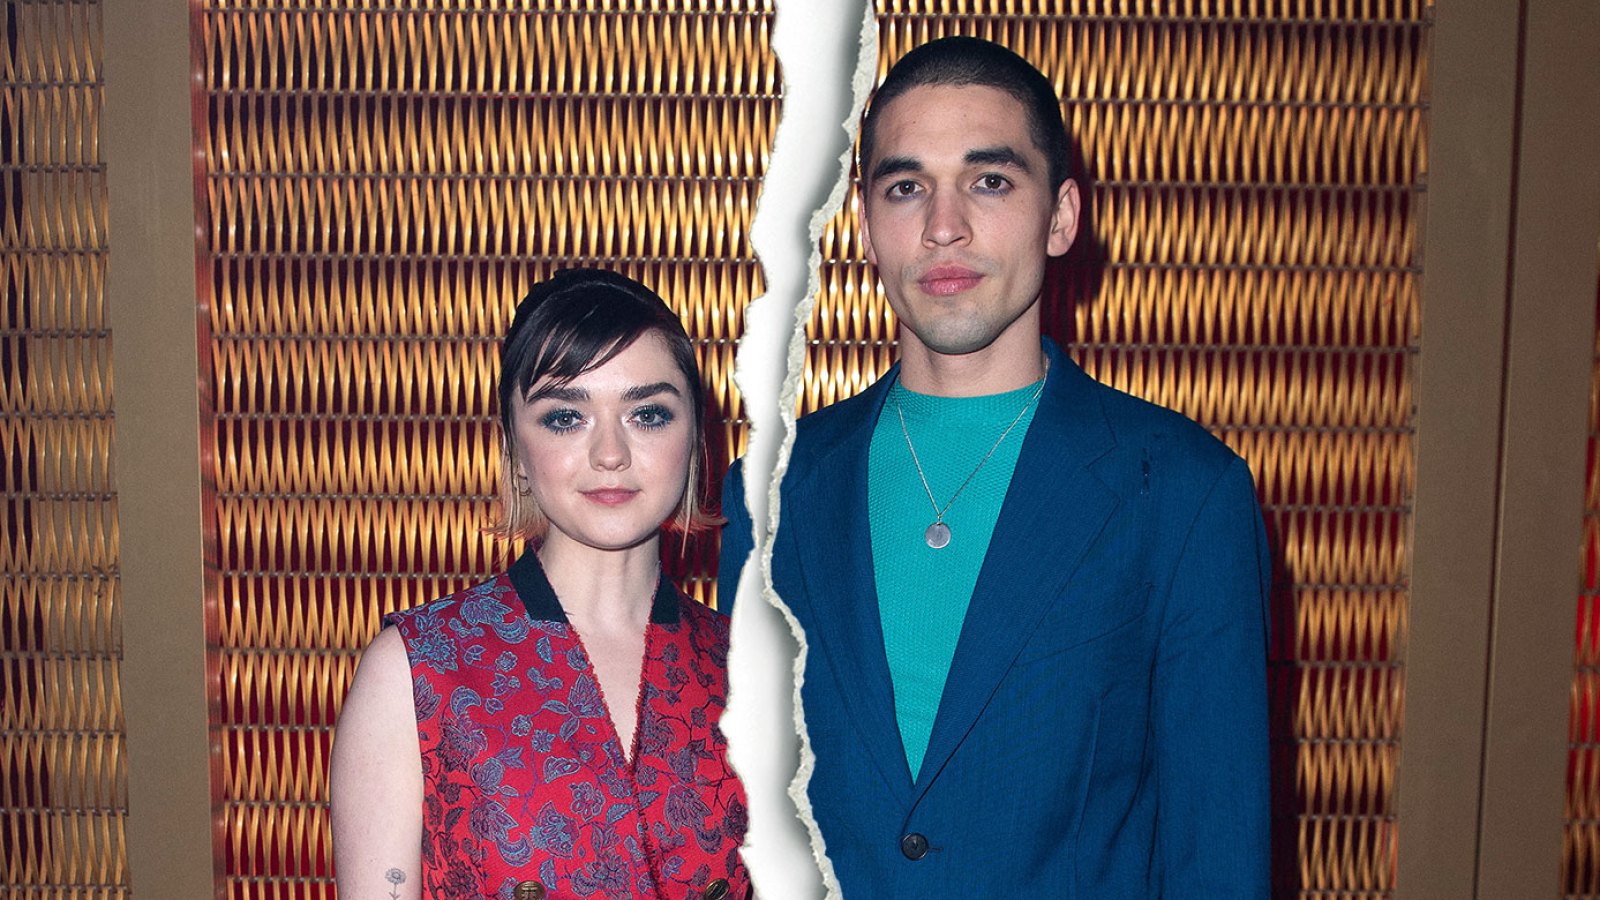 Game of Thrones Maisie Williams and Boyfriend Reuben Selby Split After 5 Years of Dating